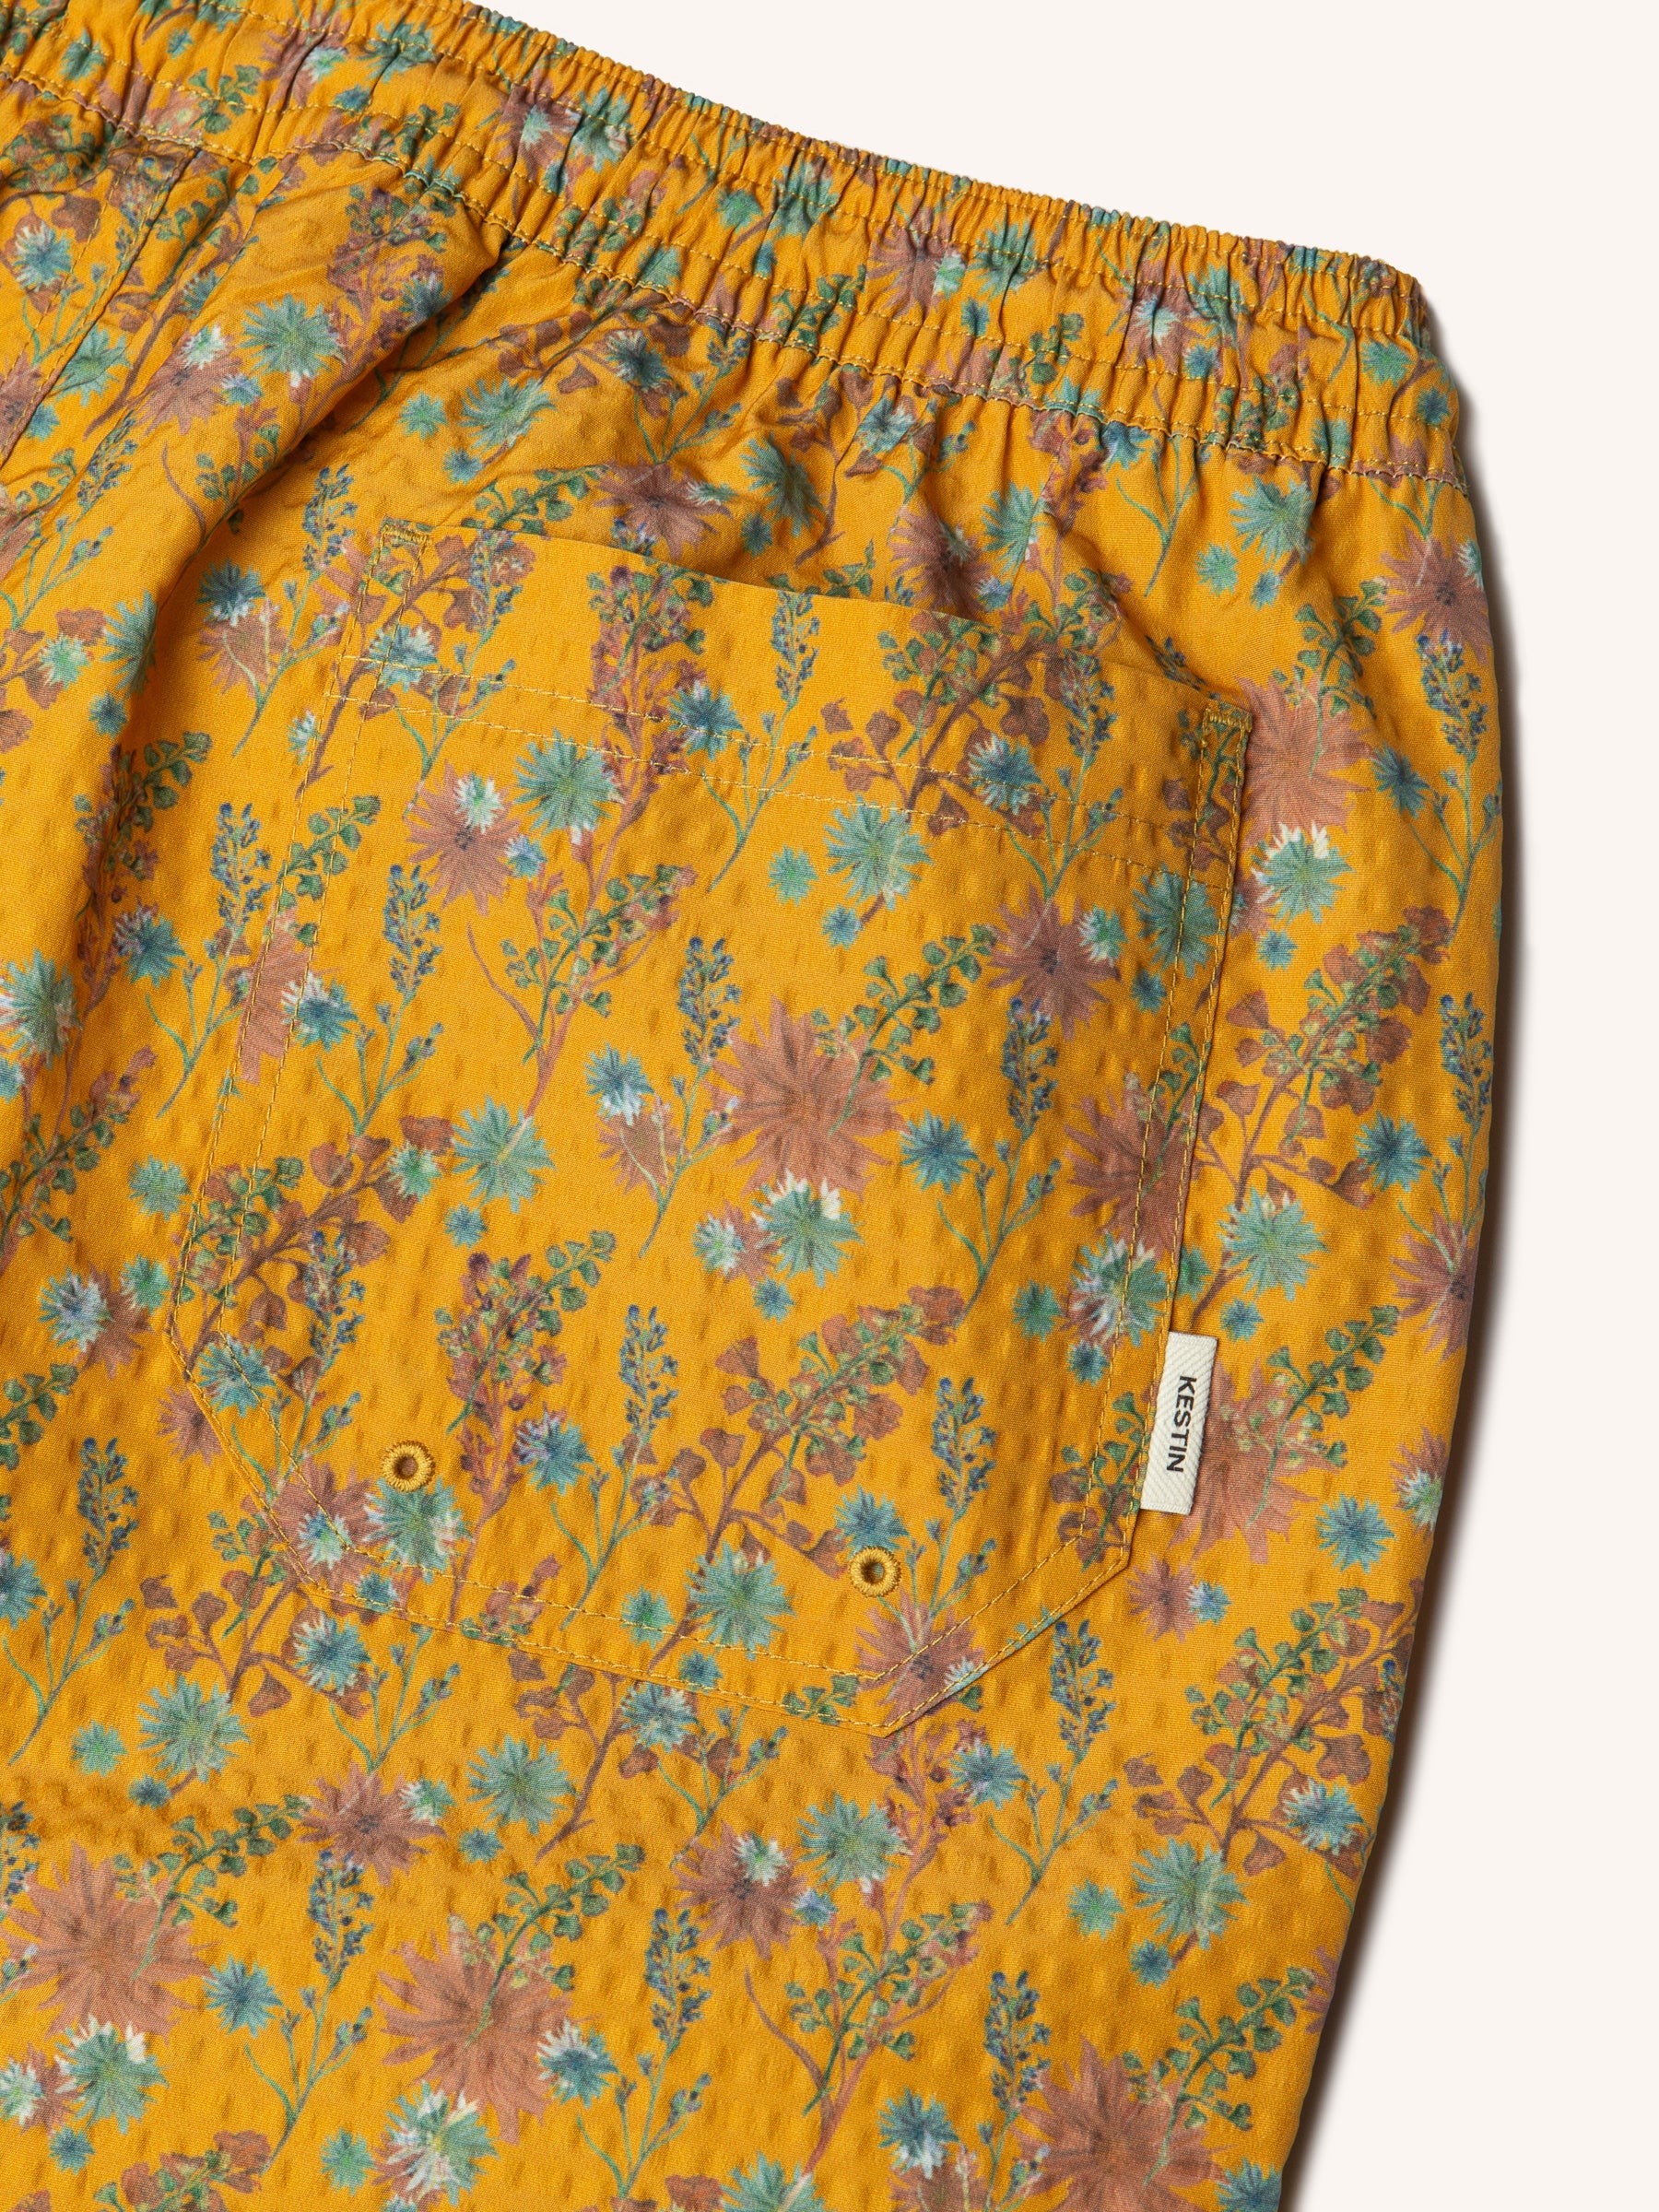 The back of the Seacliff Shorts from menswear brand Kestin, in Ochre Thistle Print.